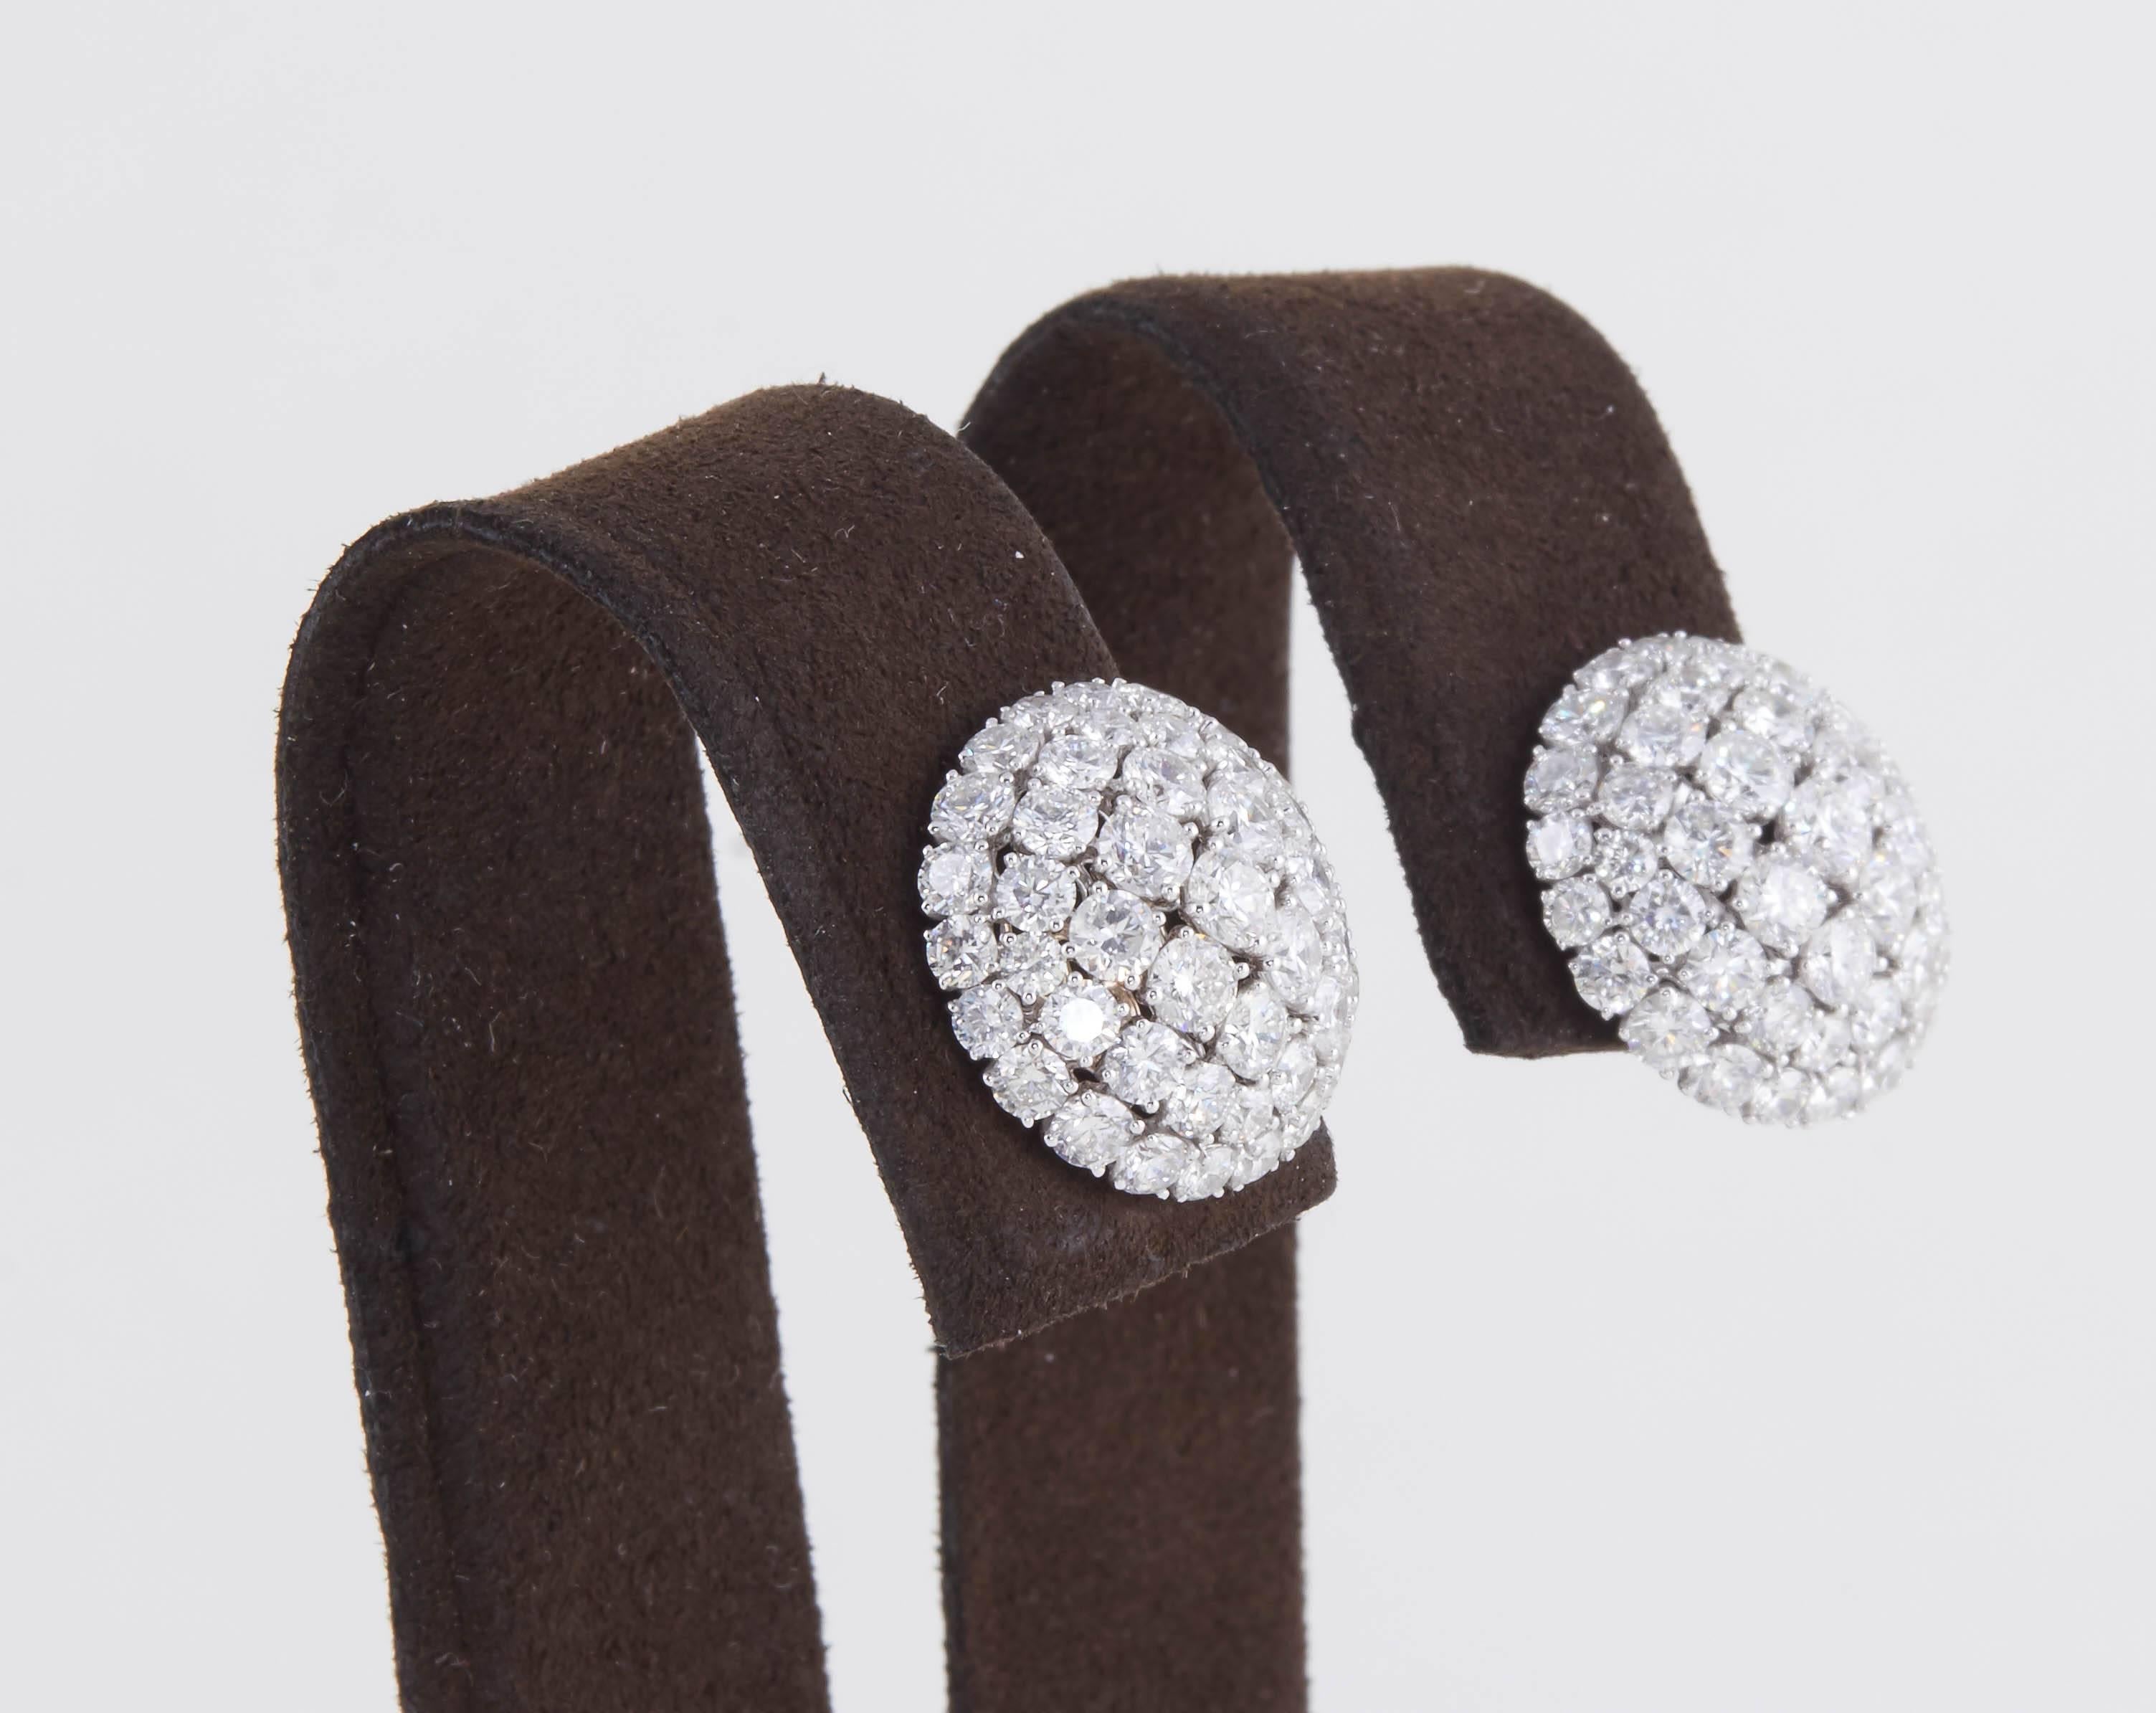 

A must have!

4.83 carats of round brilliant cut diamonds, F/G color set in 18k white gold.

These earrings were constructed to maximize brilliance in a slight dome design. 

Approximately .62 inches in diameter. 

The perfect gift, made in New